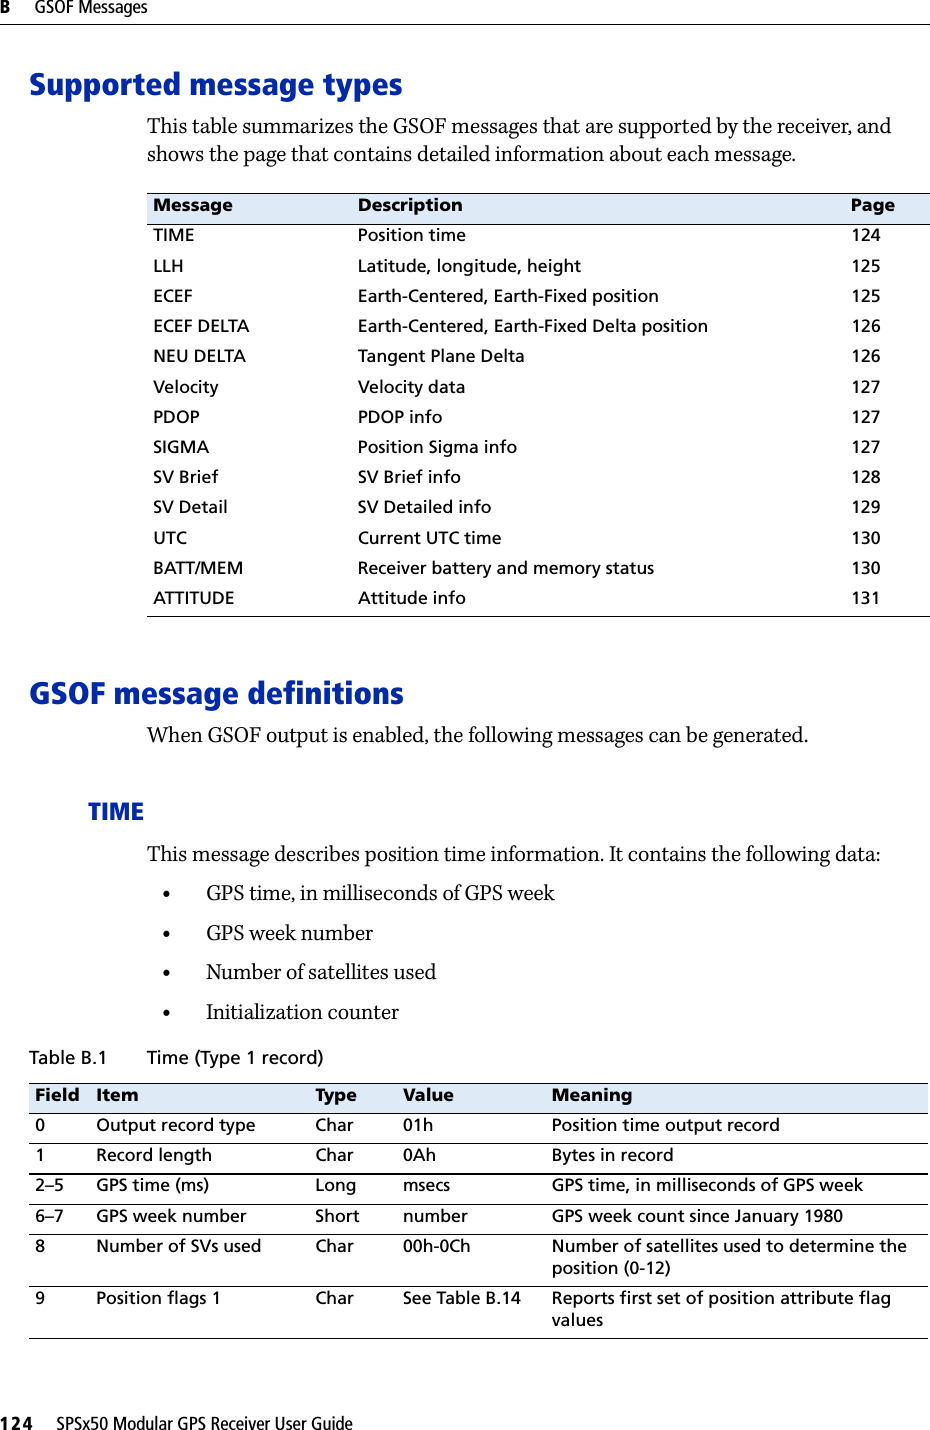 B     GSOF Messages124     SPSx50 Modular GPS Receiver User GuideSupported message typesThis table summarizes the GSOF messages that are supported by the receiver, and shows the page that contains detailed information about each message.GSOF message definitionsWhen GSOF output is enabled, the following messages can be generated.TIMEThis message describes position time information. It contains the following data:•GPS time, in milliseconds of GPS week•GPS week number•Number of satellites used•Initialization counterMessage  Description PageTIME Position time 124LLH Latitude, longitude, height 125ECEF Earth-Centered, Earth-Fixed position 125ECEF DELTA Earth-Centered, Earth-Fixed Delta position 126NEU DELTA Tangent Plane Delta 126Velocity Velocity data 127PDOP PDOP info 127SIGMA Position Sigma info 127SV Brief SV Brief info 128SV Detail SV Detailed info 129UTC Current UTC time 130BATT/MEM Receiver battery and memory status 130ATTITUDE Attitude info 131Table B.1 Time (Type 1 record)Field Item Type Value Meaning0 Output record type Char 01h Position time output record1 Record length Char 0Ah Bytes in record2–5 GPS time (ms) Long msecs GPS time, in milliseconds of GPS week6–7 GPS week number Short number GPS week count since January 19808 Number of SVs used Char 00h-0Ch Number of satellites used to determine the position (0-12)9 Position flags 1 Char See Table B.14 Reports first set of position attribute flag values